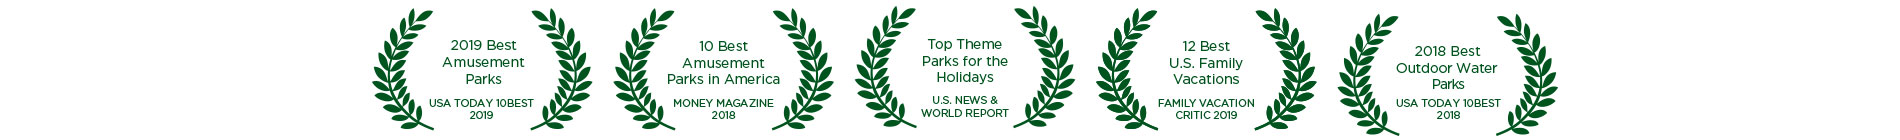 Busch Gardens Williamsburg | 2018 Best Amusement Parks - USA 10Best 2018 | 19 Best Amusement Parks in America - Money Magazine 2018 | Top Theme Parks for Holidays - U.S. News & World Report | 12 Best U.S. Family Vacations - Family Vacation Critic 2019 |Top Spring Break Destinations for Families - Tips for Family Trips 2018